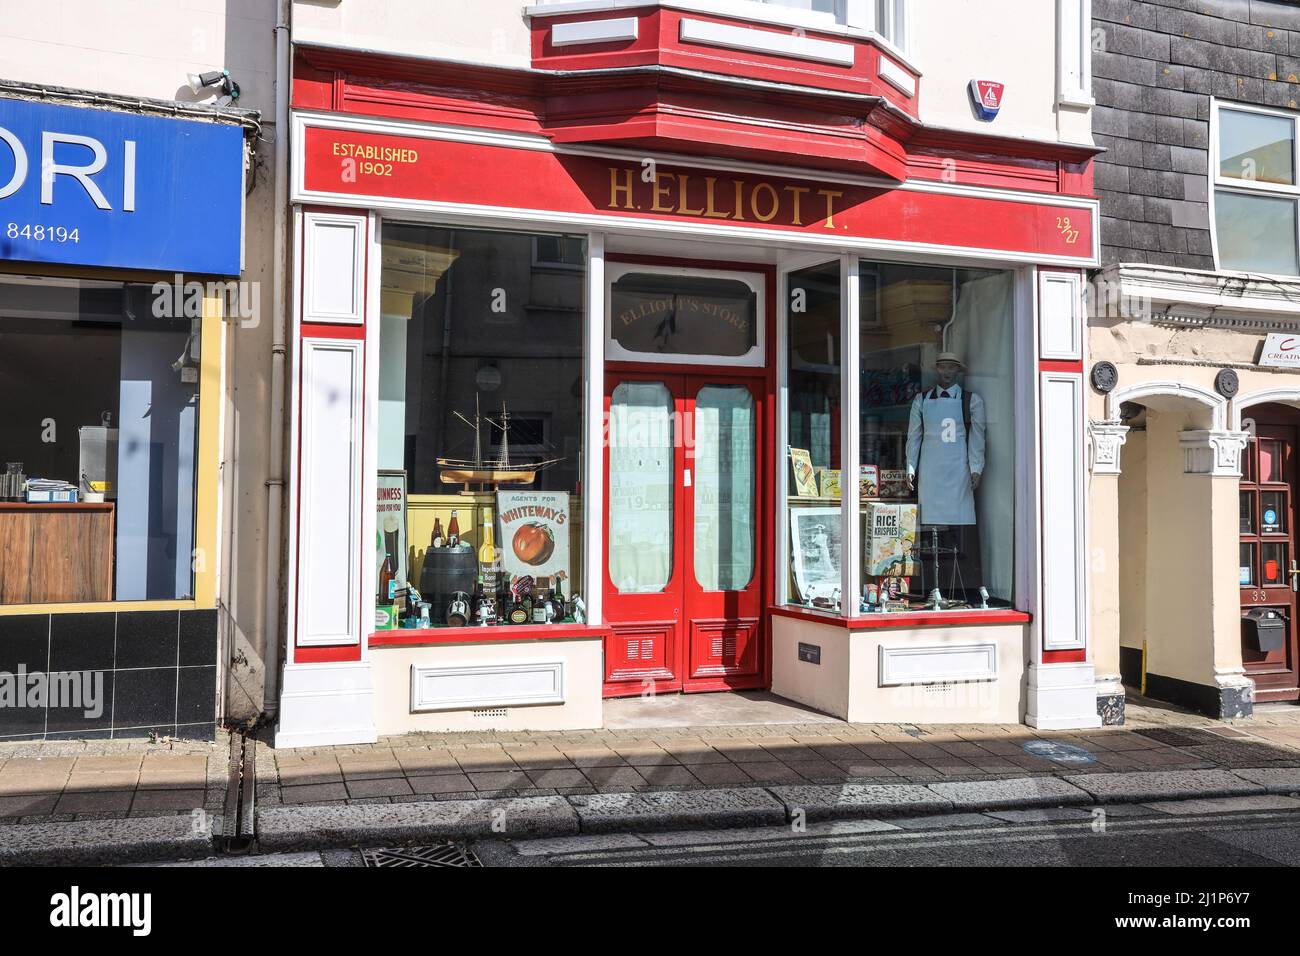 A tripback in time to H Elliott’s a general shop turned into a museum at Saltash in Cornwall Stock Photo